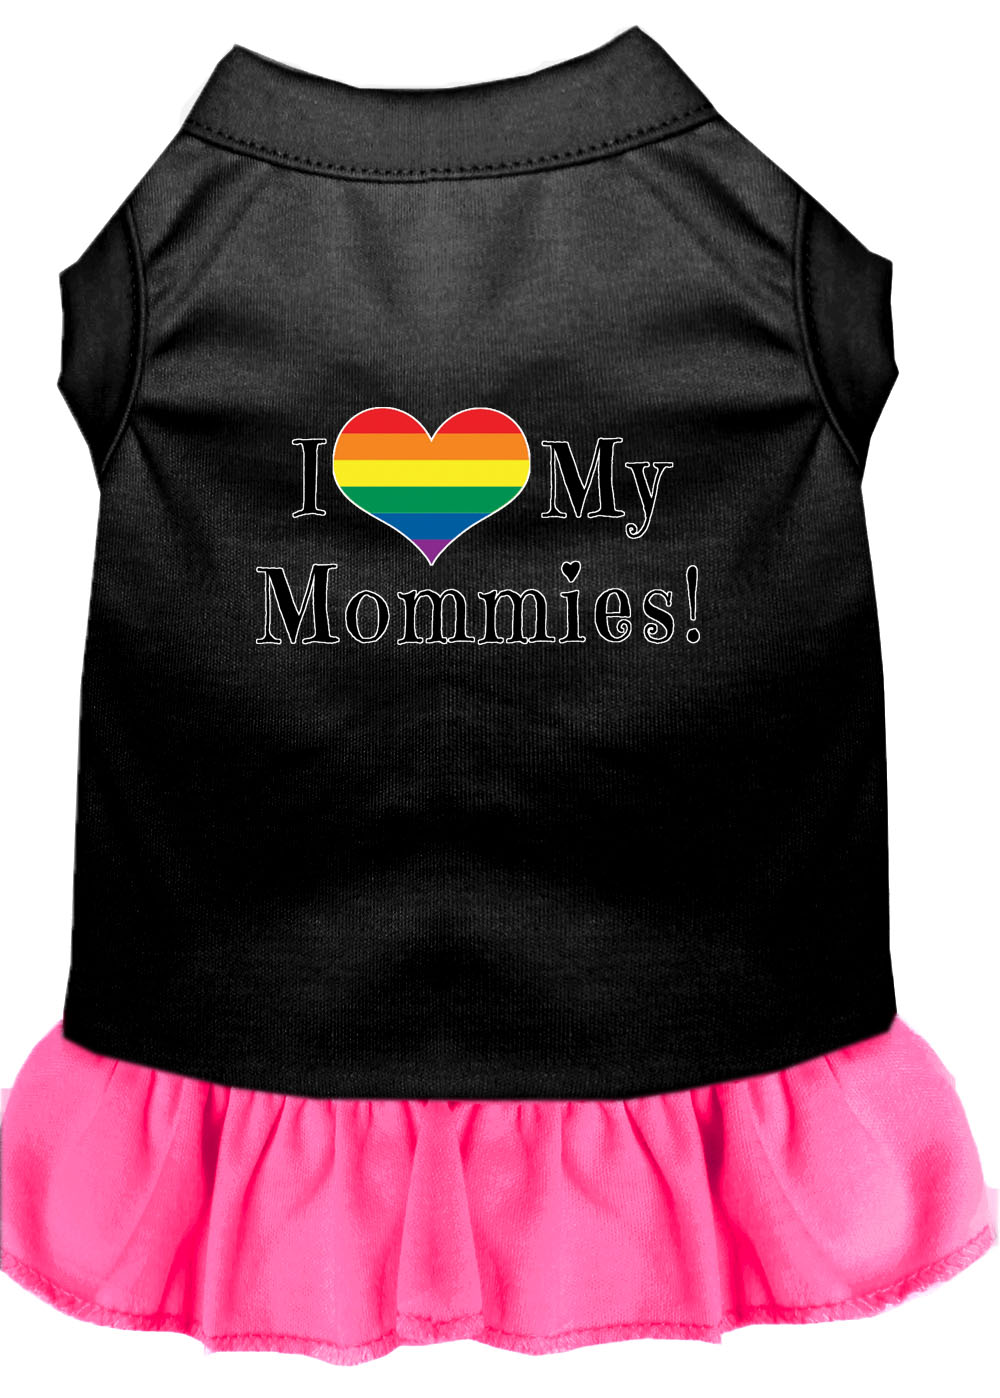 I Heart my Mommies Screen Print Dog Dress Black with Bright Pink Sm